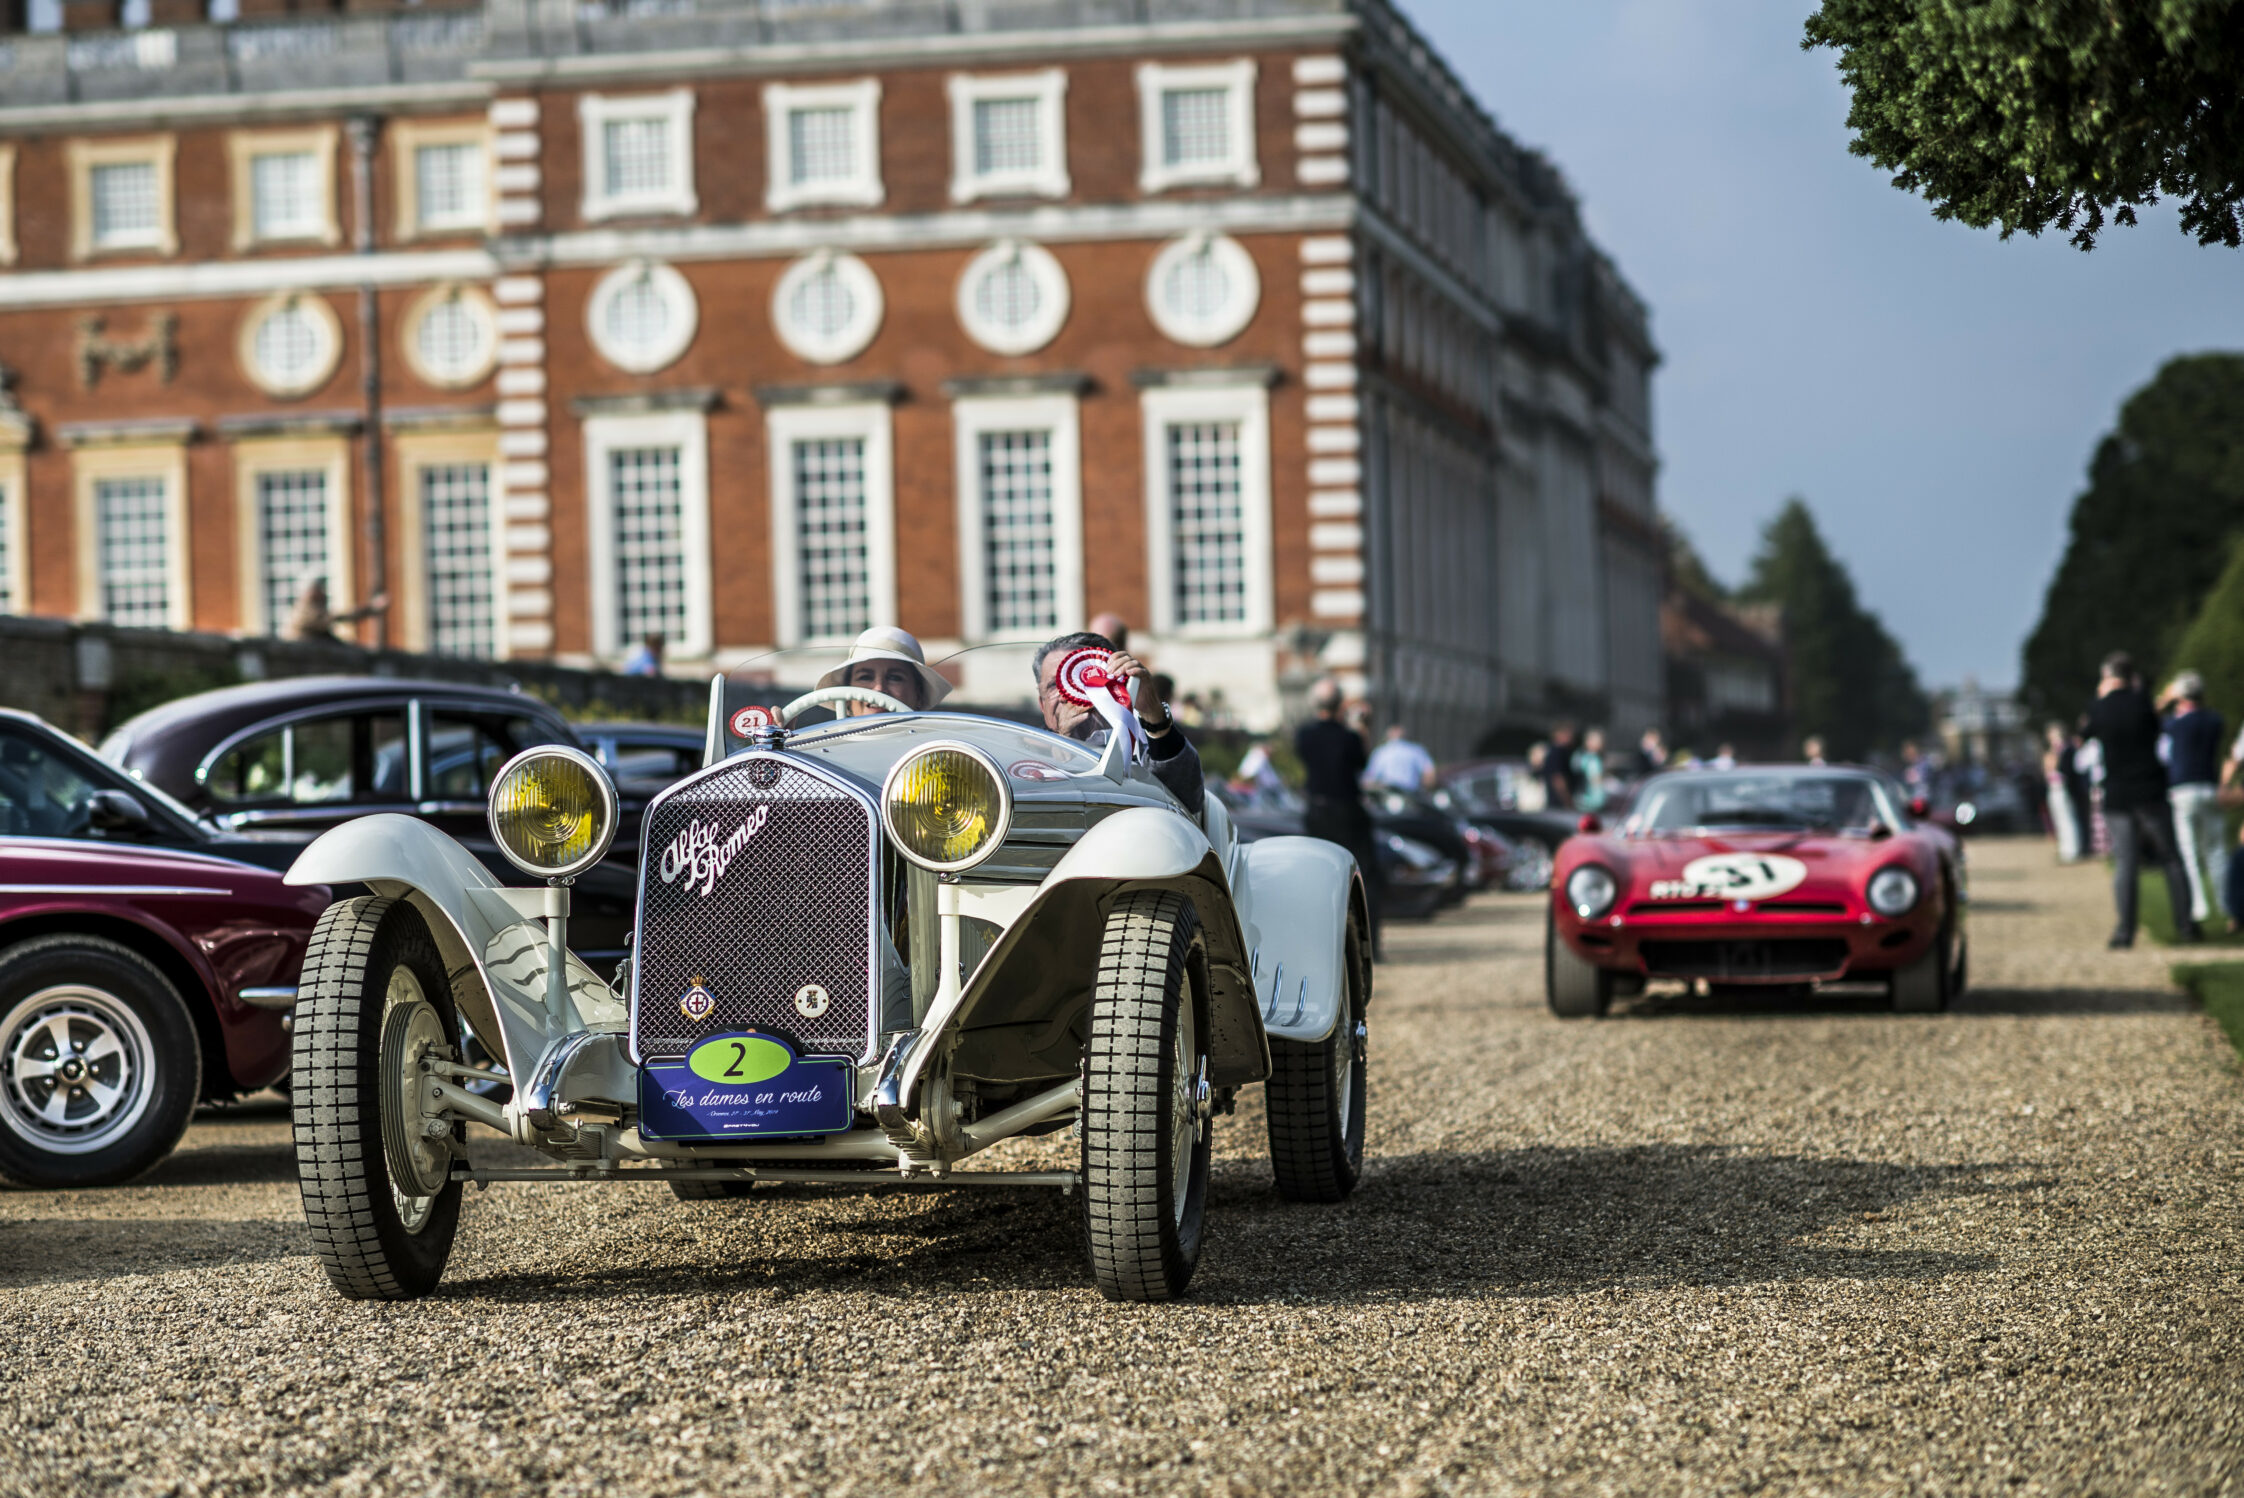 Concours of Elegance Prepares for Special Tenth Anniversary Show in 2022